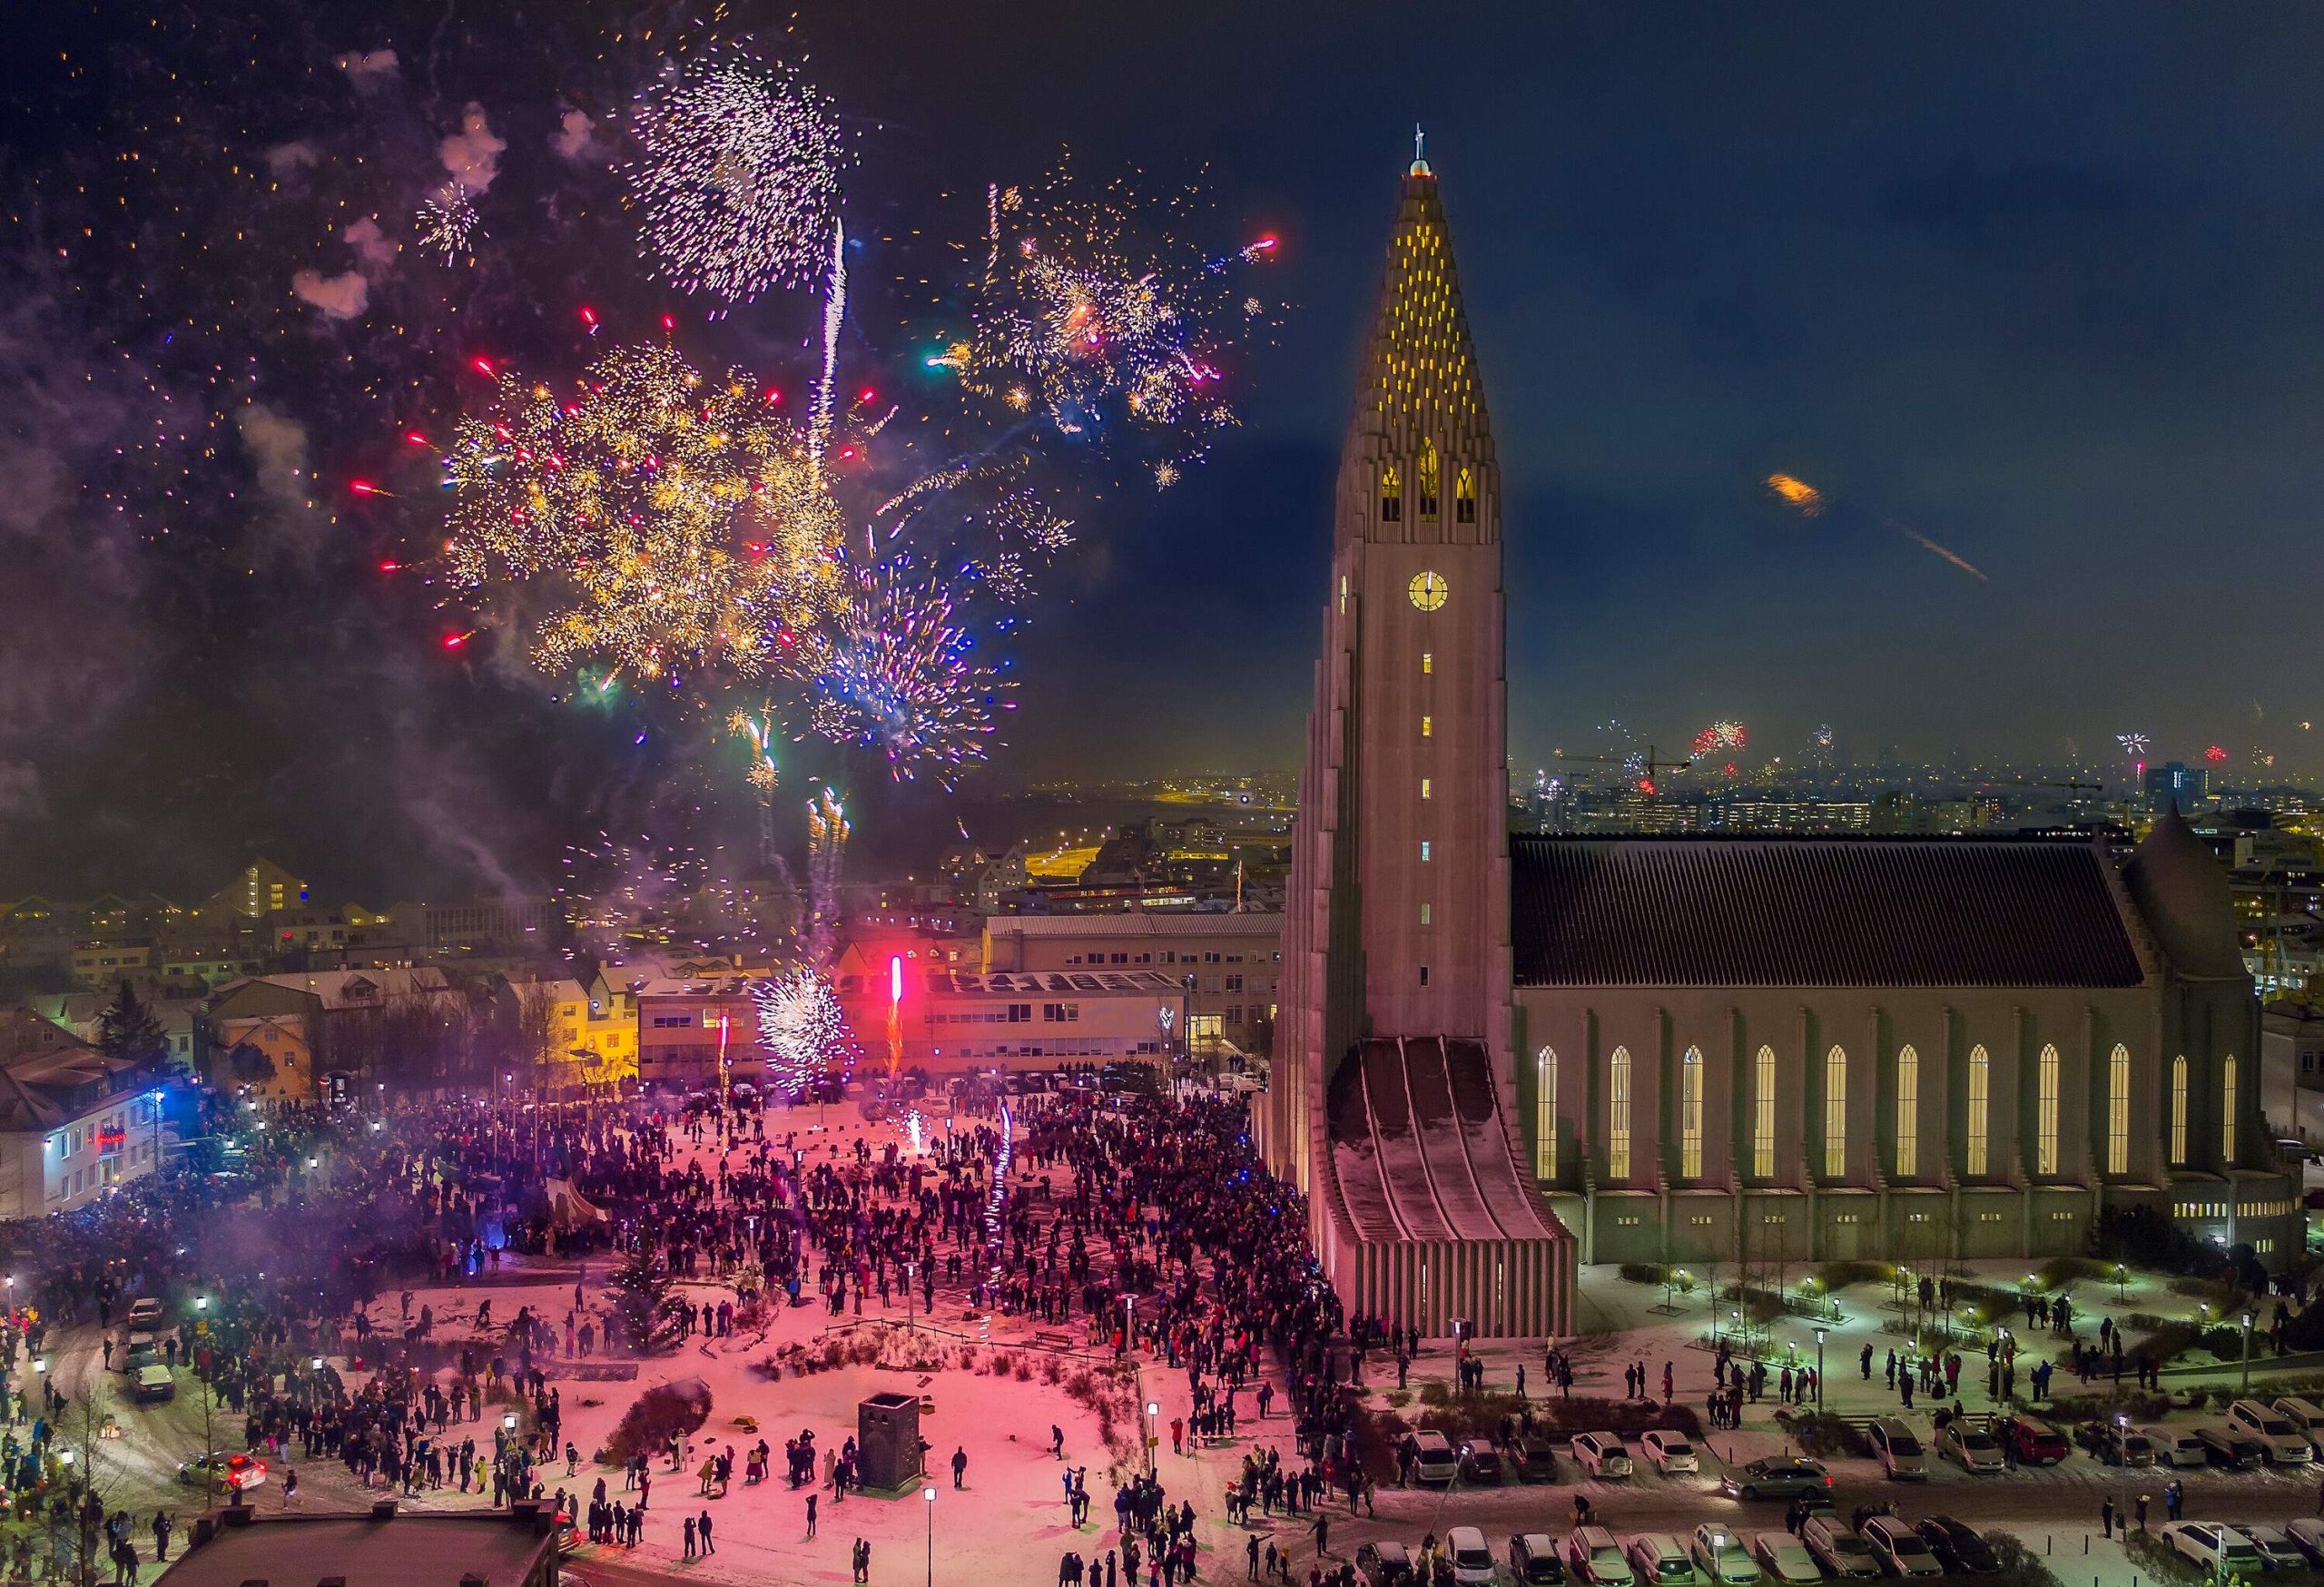 People gathered in the park next to the tallest church in Iceland to witness the colourful fireworks performance display on New Year’s Eve.